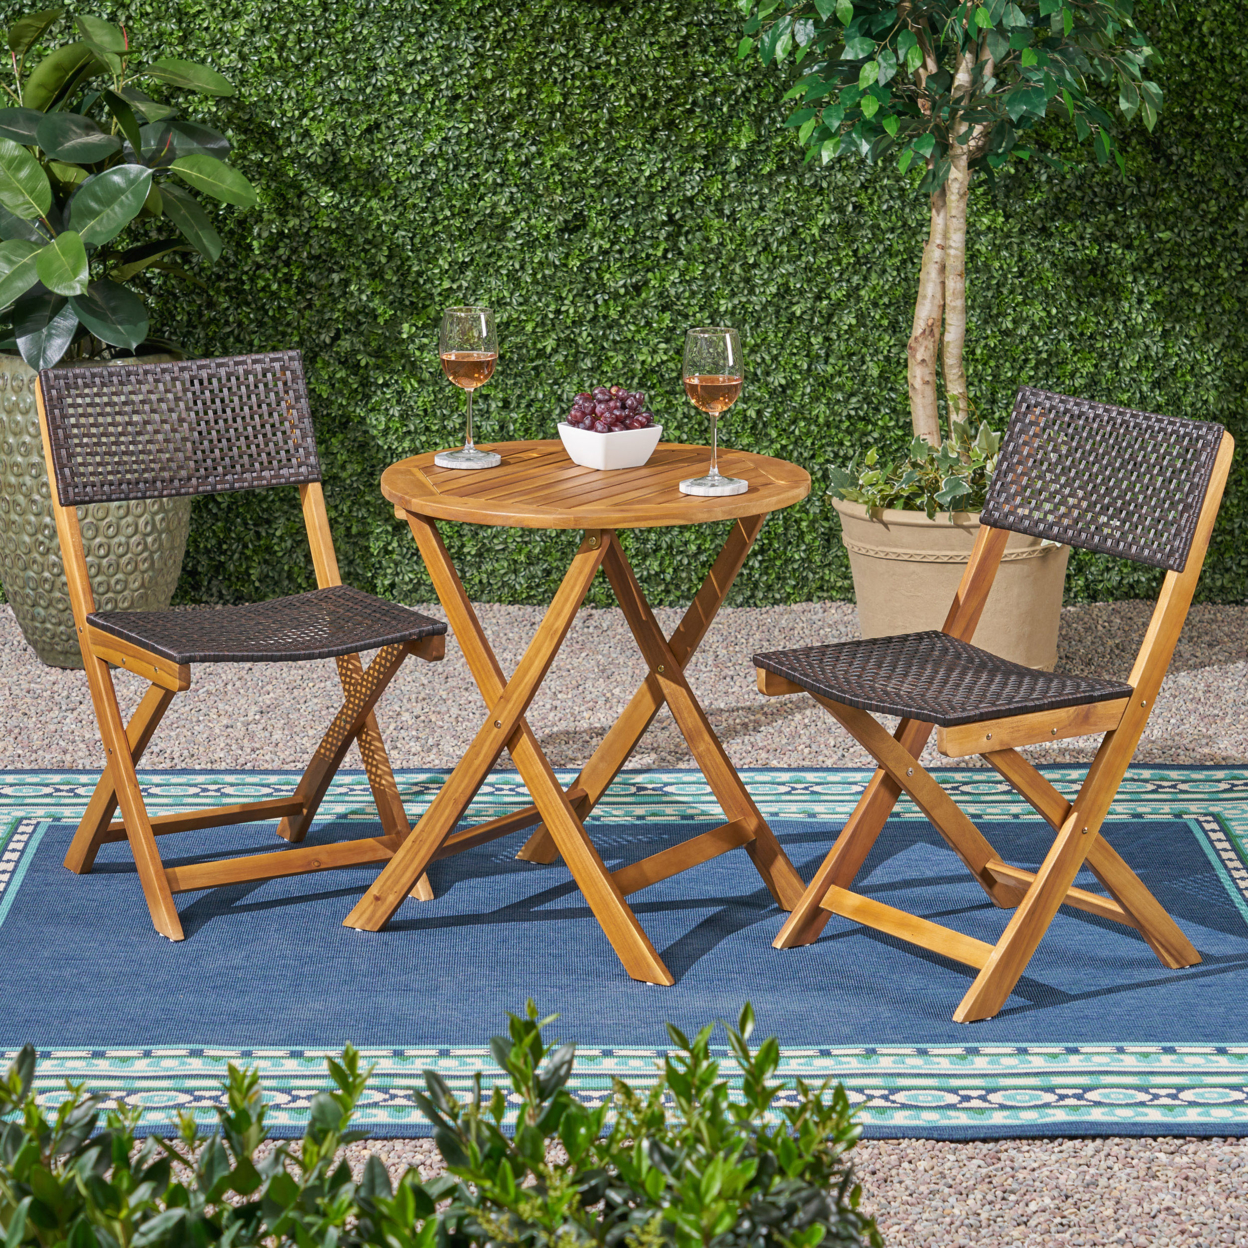 Ida Outdoor Acacia Wood Wicker Foldable Bistro Set With Chairs And Table - Teak Finish + Brown